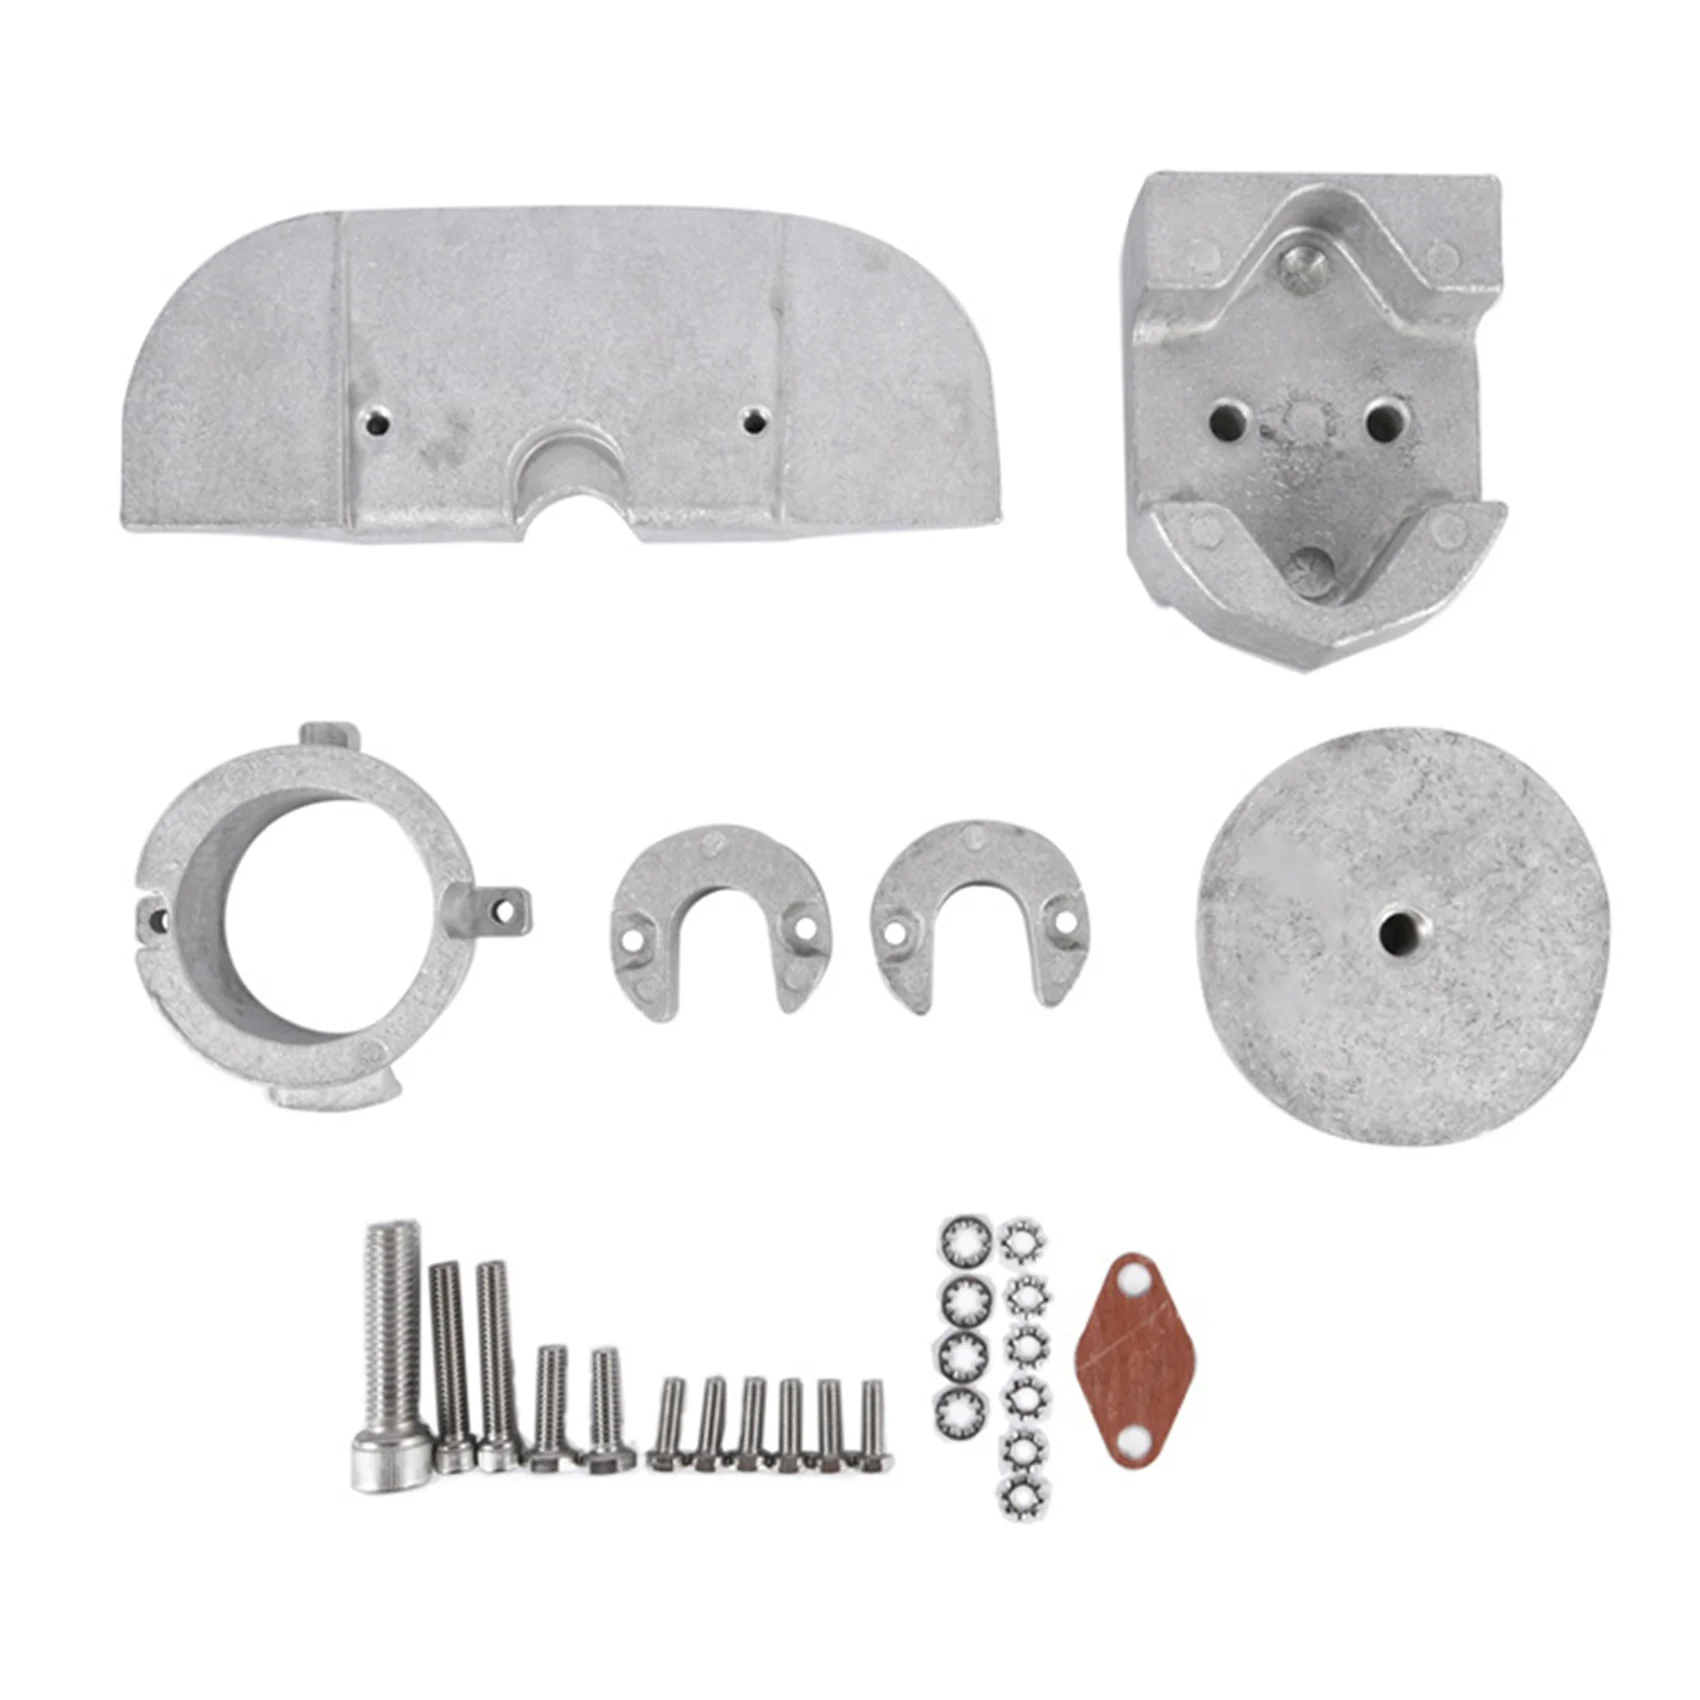 Outboard Engine Anode Aluminum Alloy Kit for Mercury Alpha One Gen 888756Q03 888756Q01 Outboard Engine Protection Anode